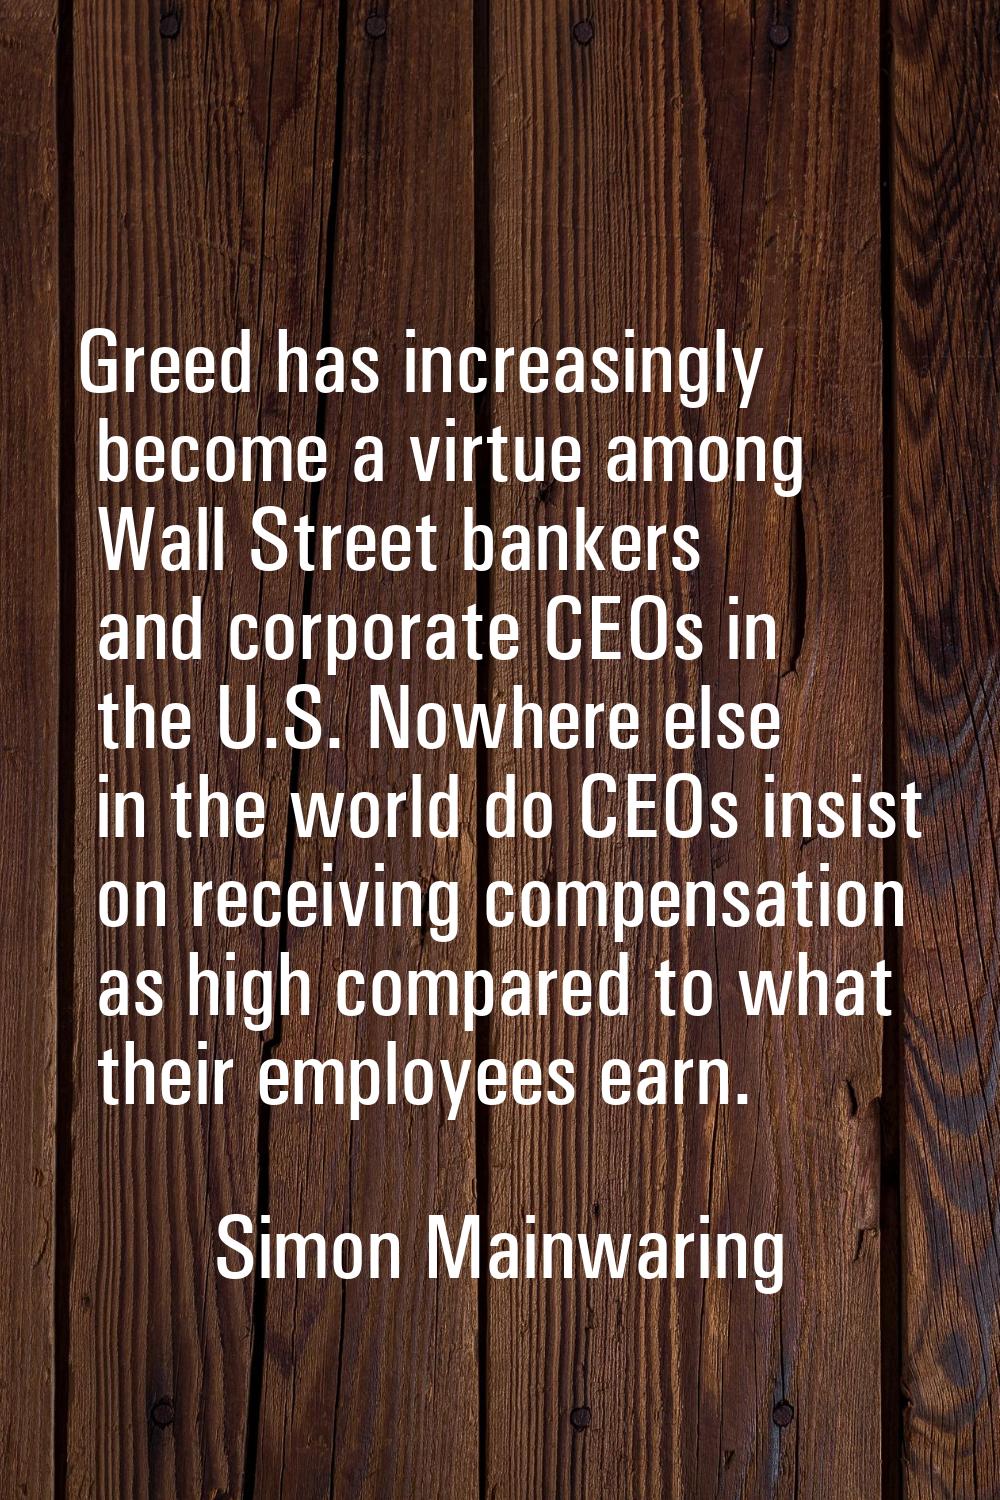 Greed has increasingly become a virtue among Wall Street bankers and corporate CEOs in the U.S. Now